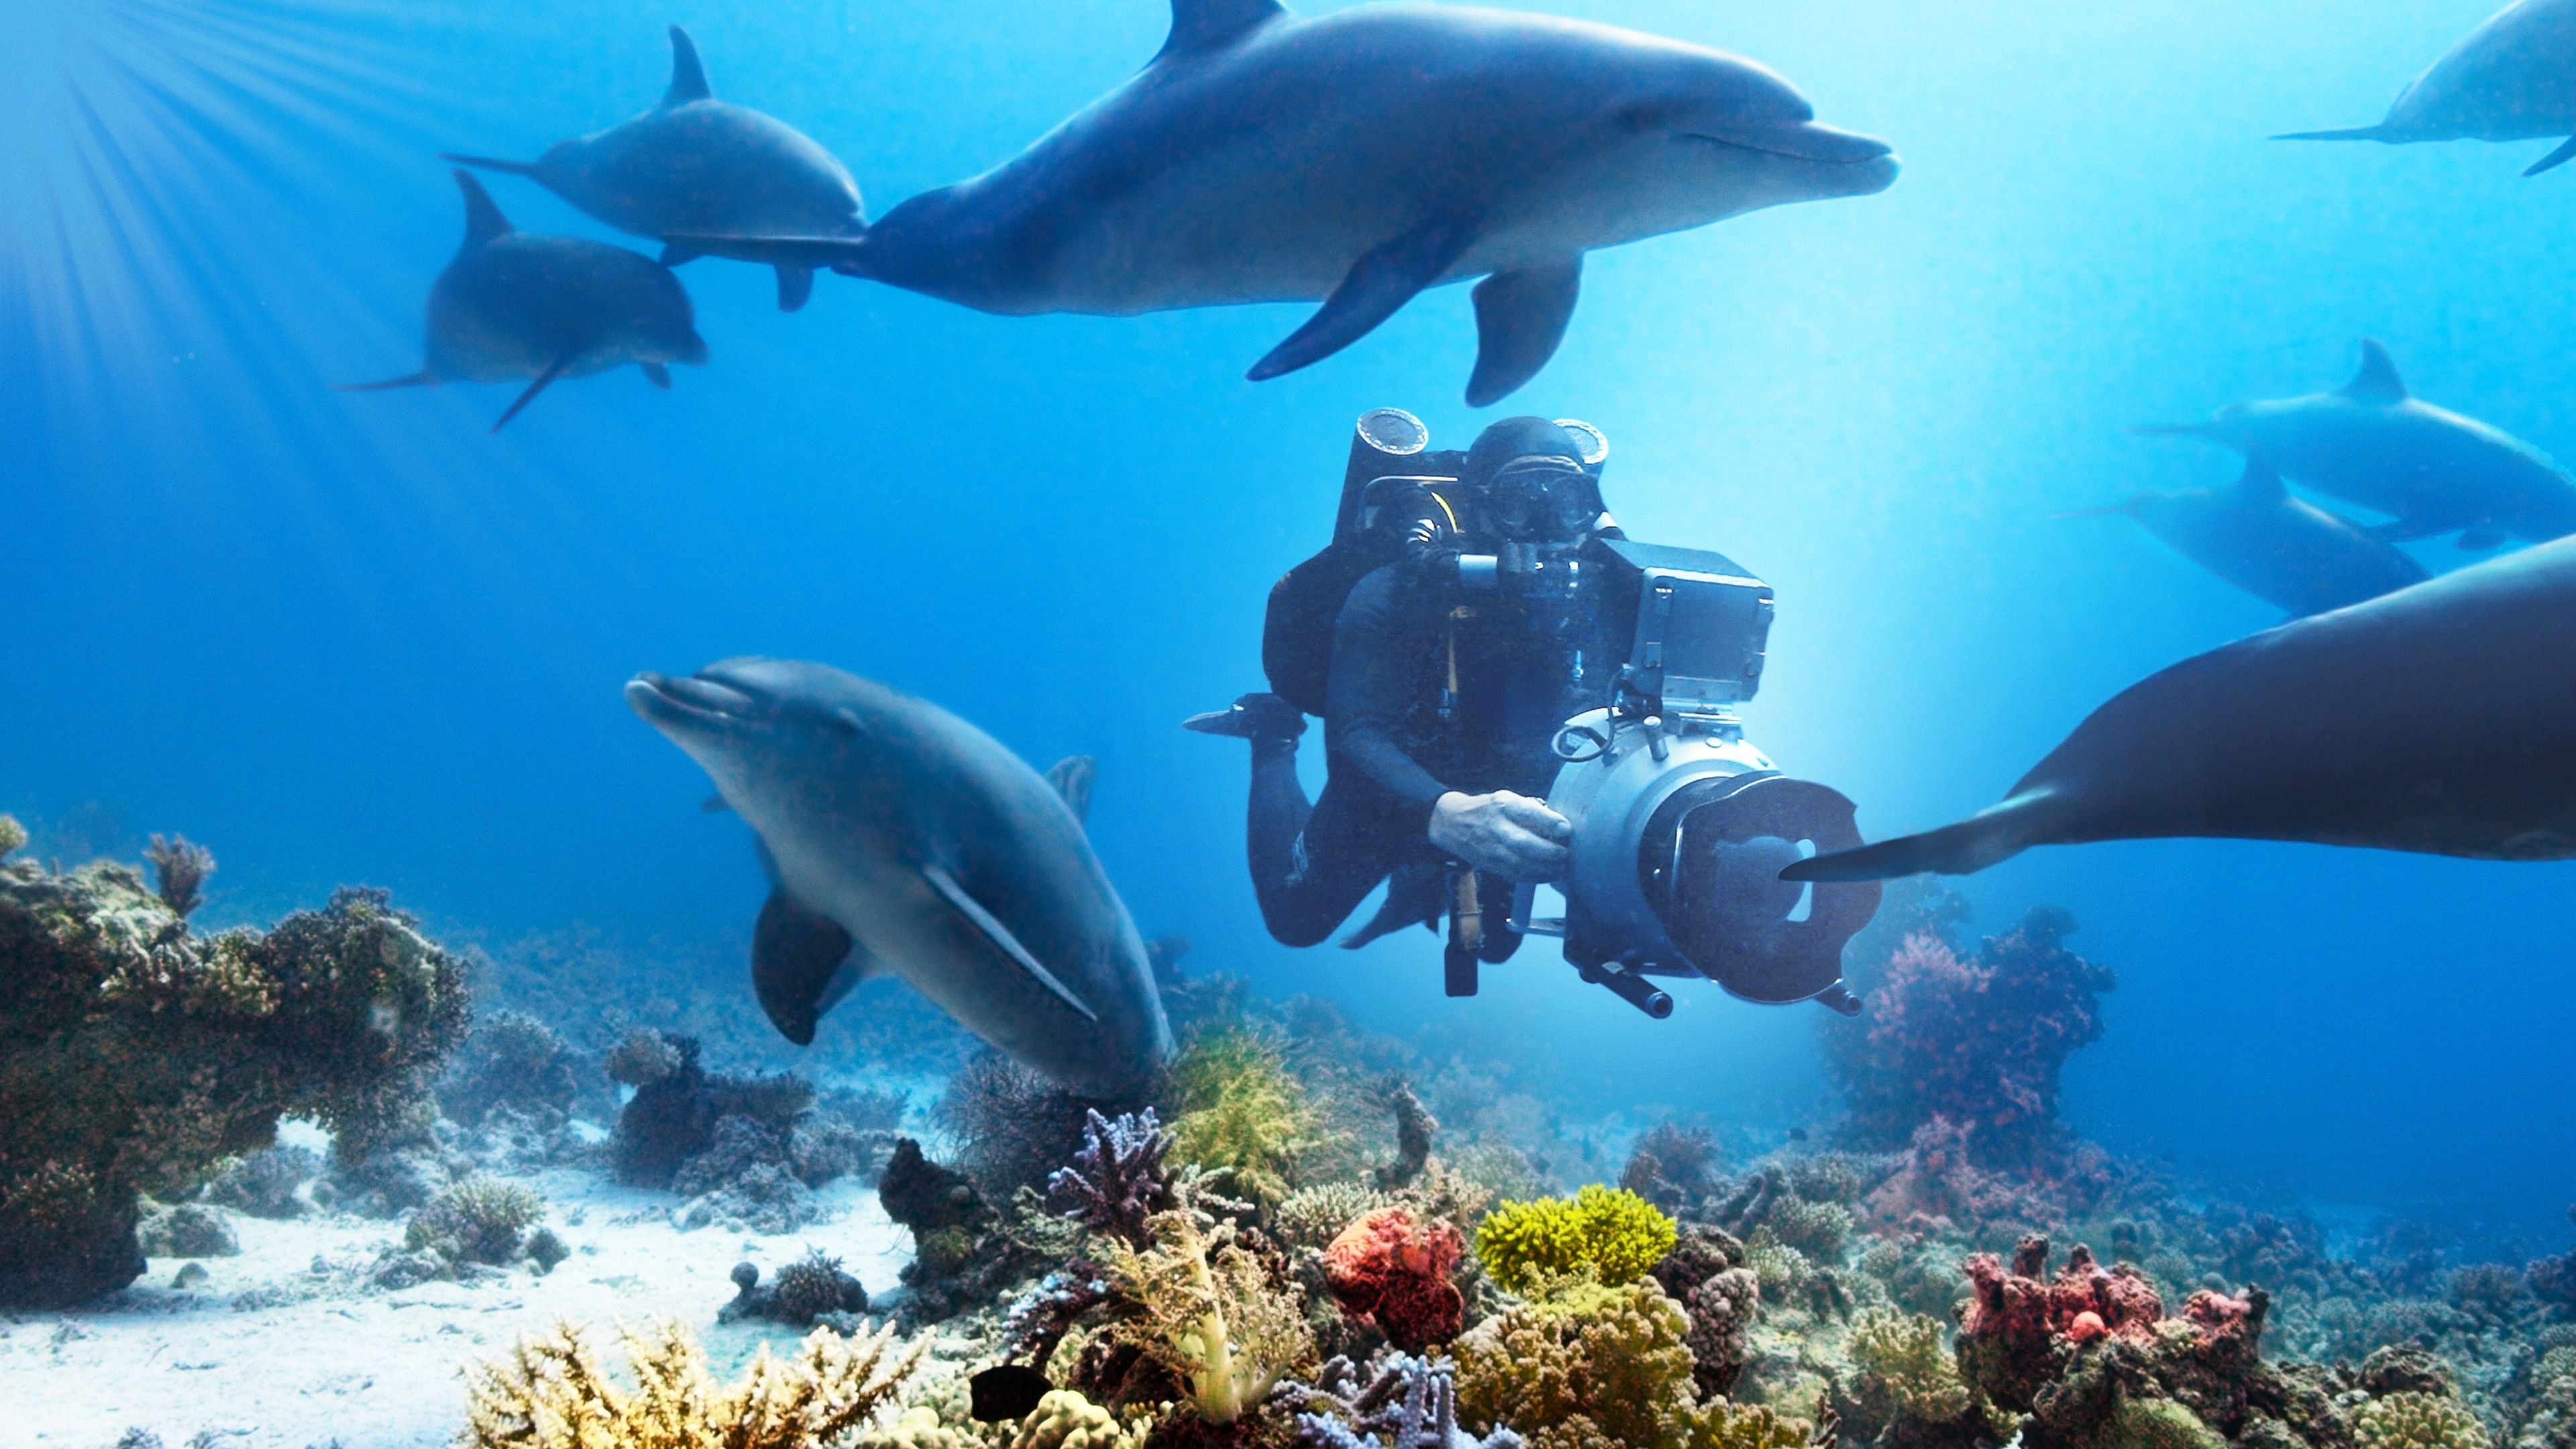 Diving with dolphins, Backdrops the movie database, Up-close encounters, Captivating marine moments, 3840x2160 4K Desktop